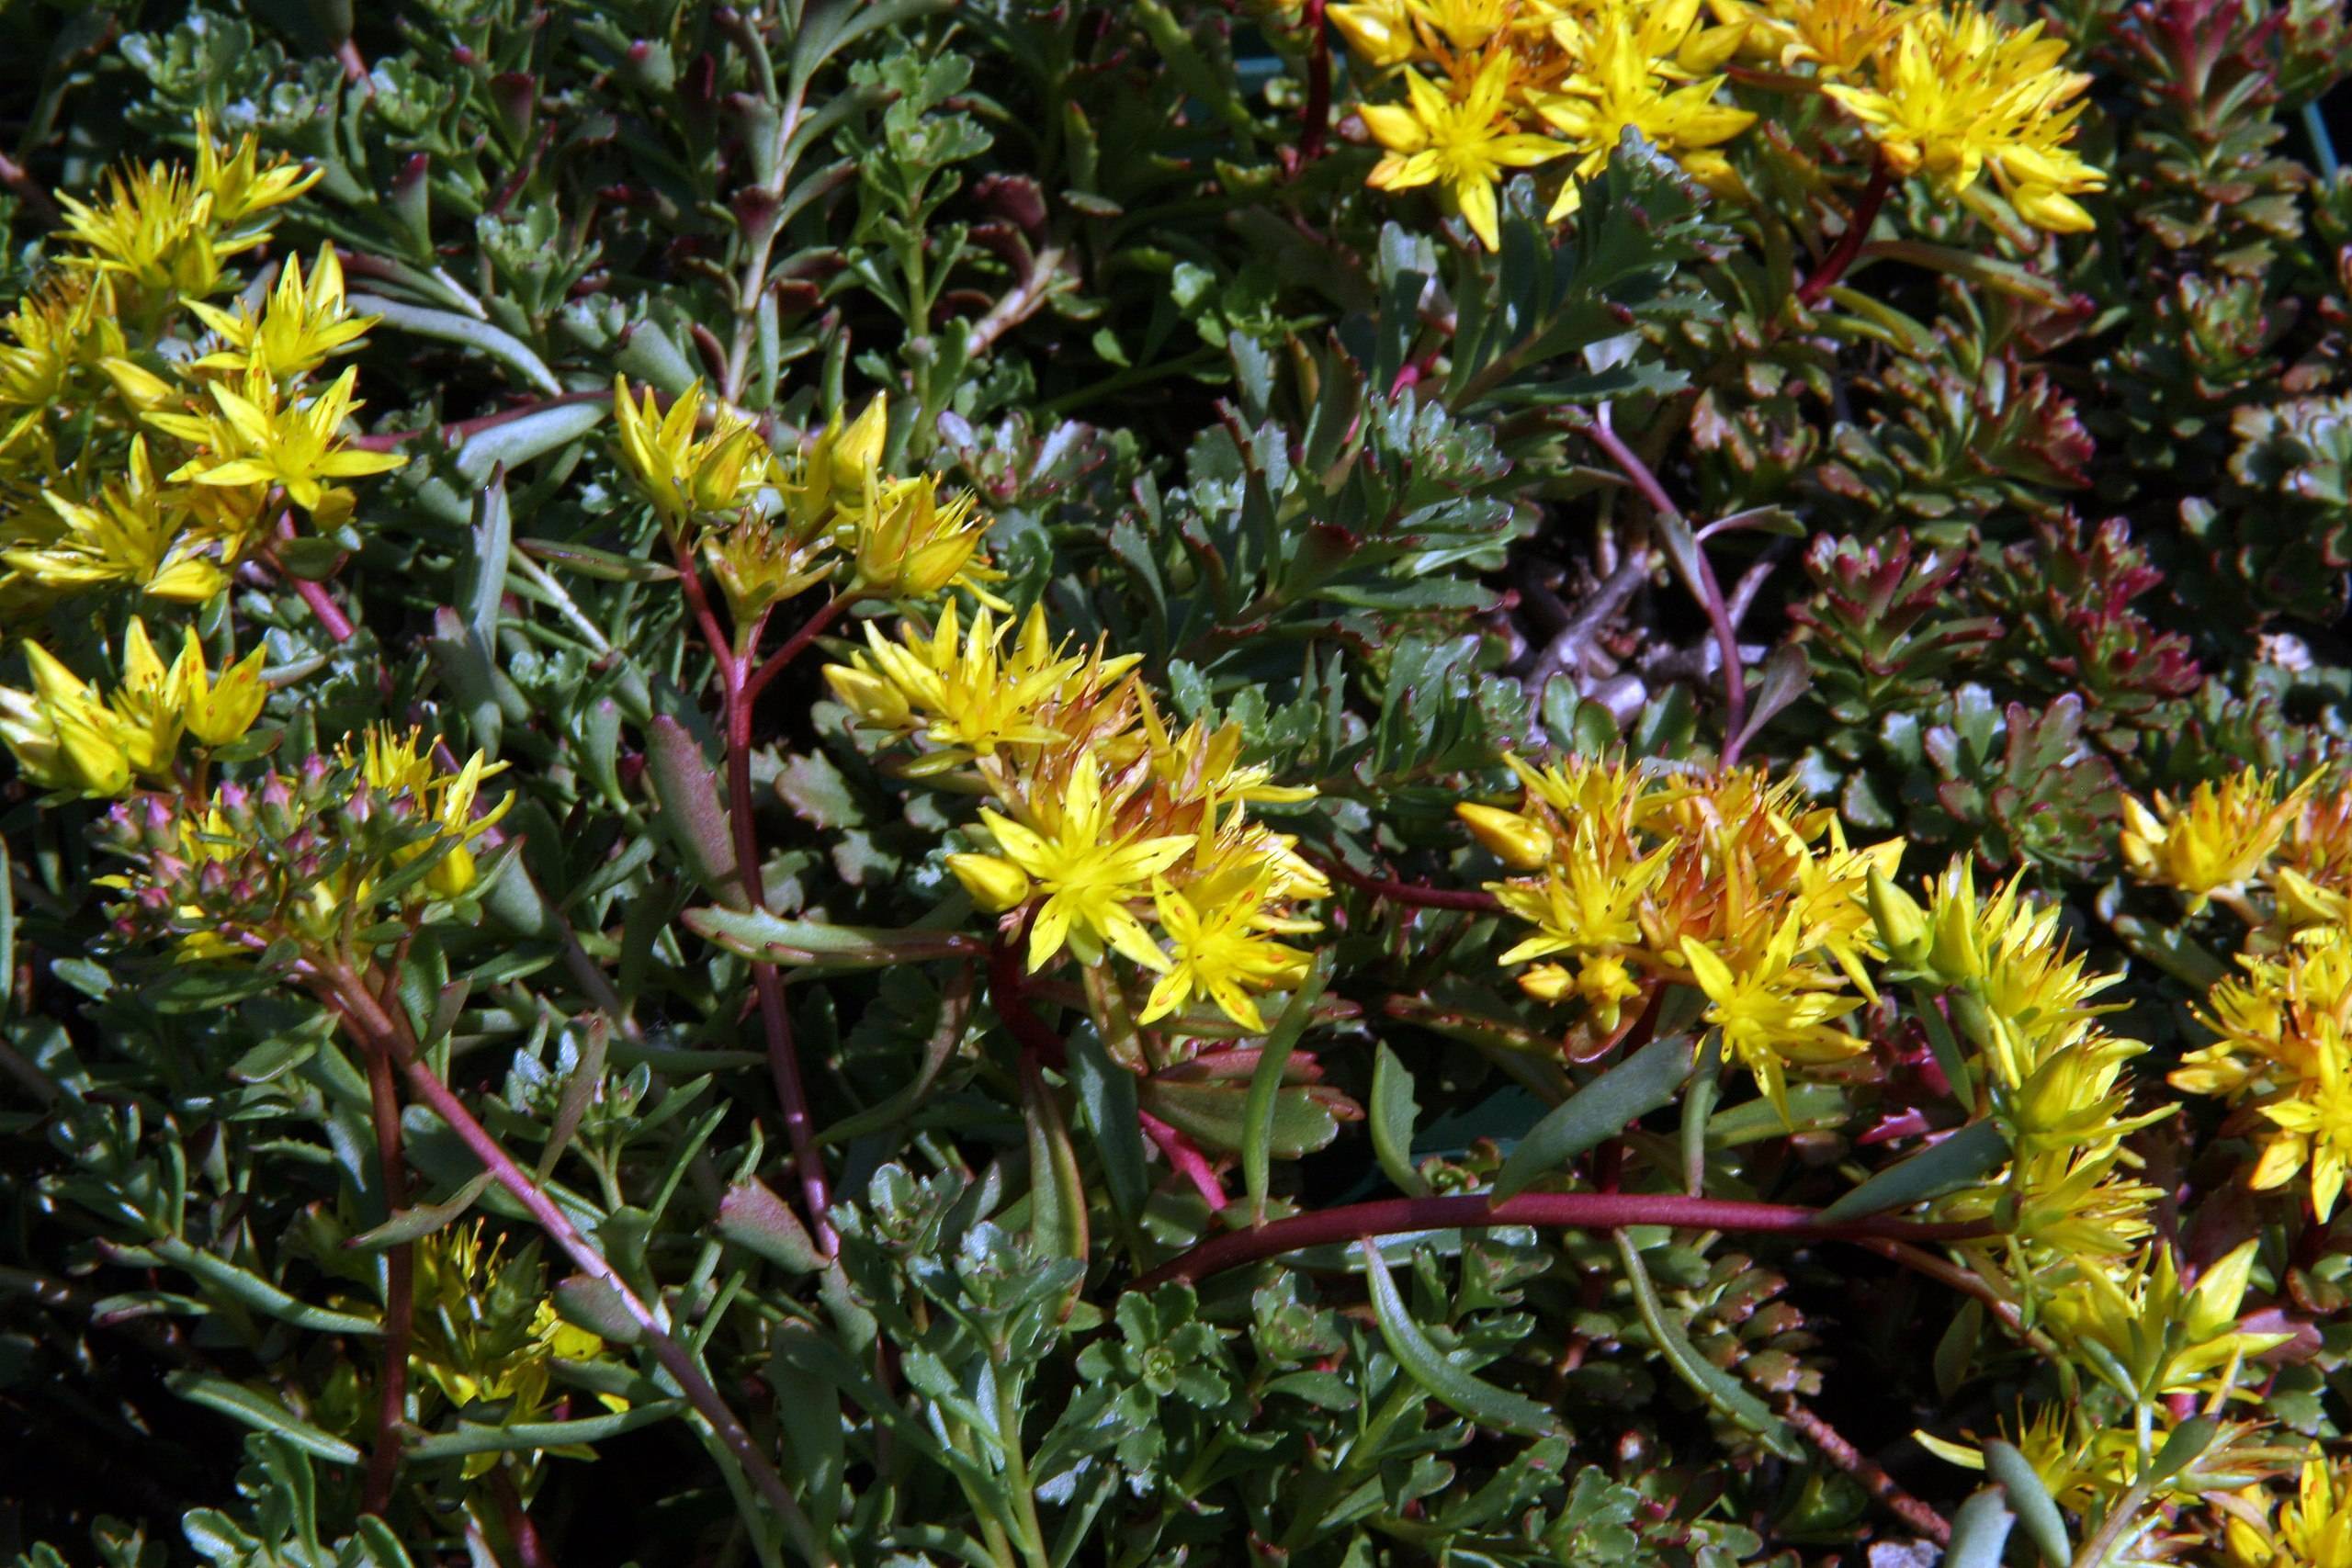 yellow-pink flowers with burgundy-green stems and green leaves